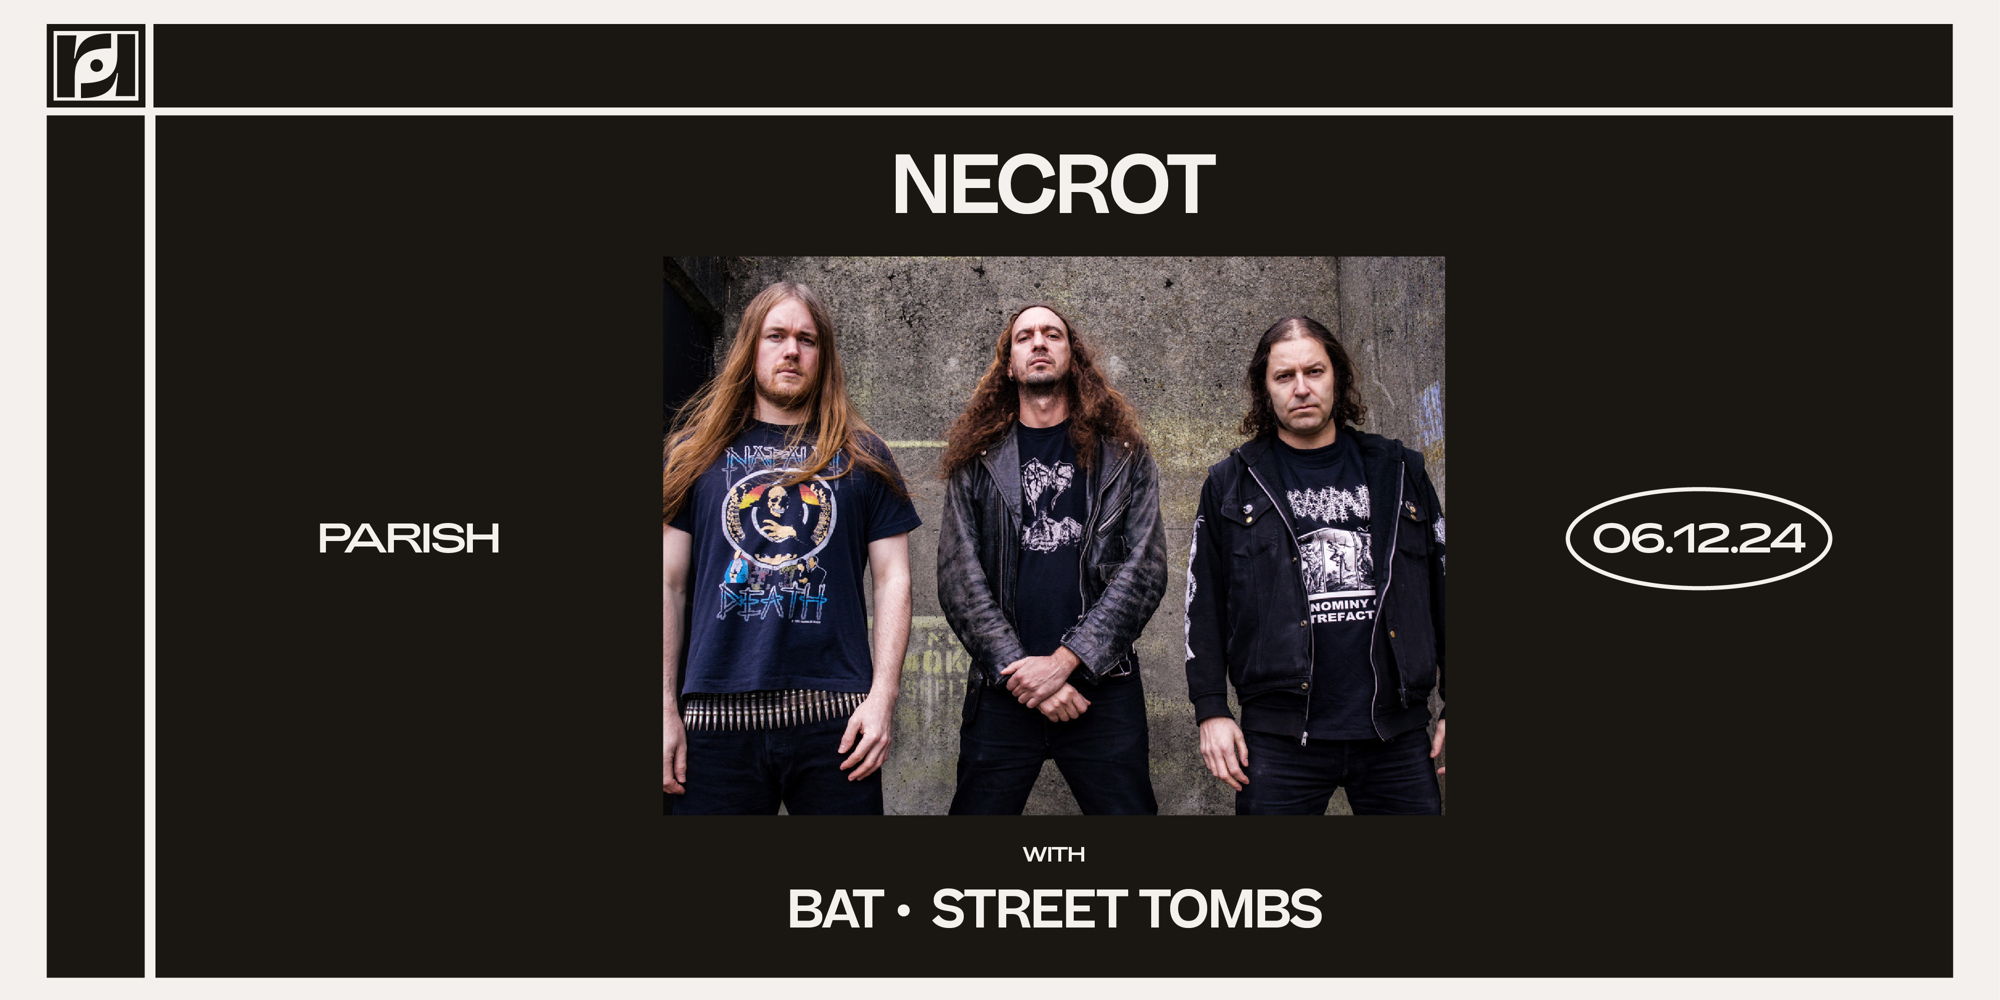 Resound Presents: Necrot w/ BAT, and Street Tombs at Parish on 6/12 promotional image